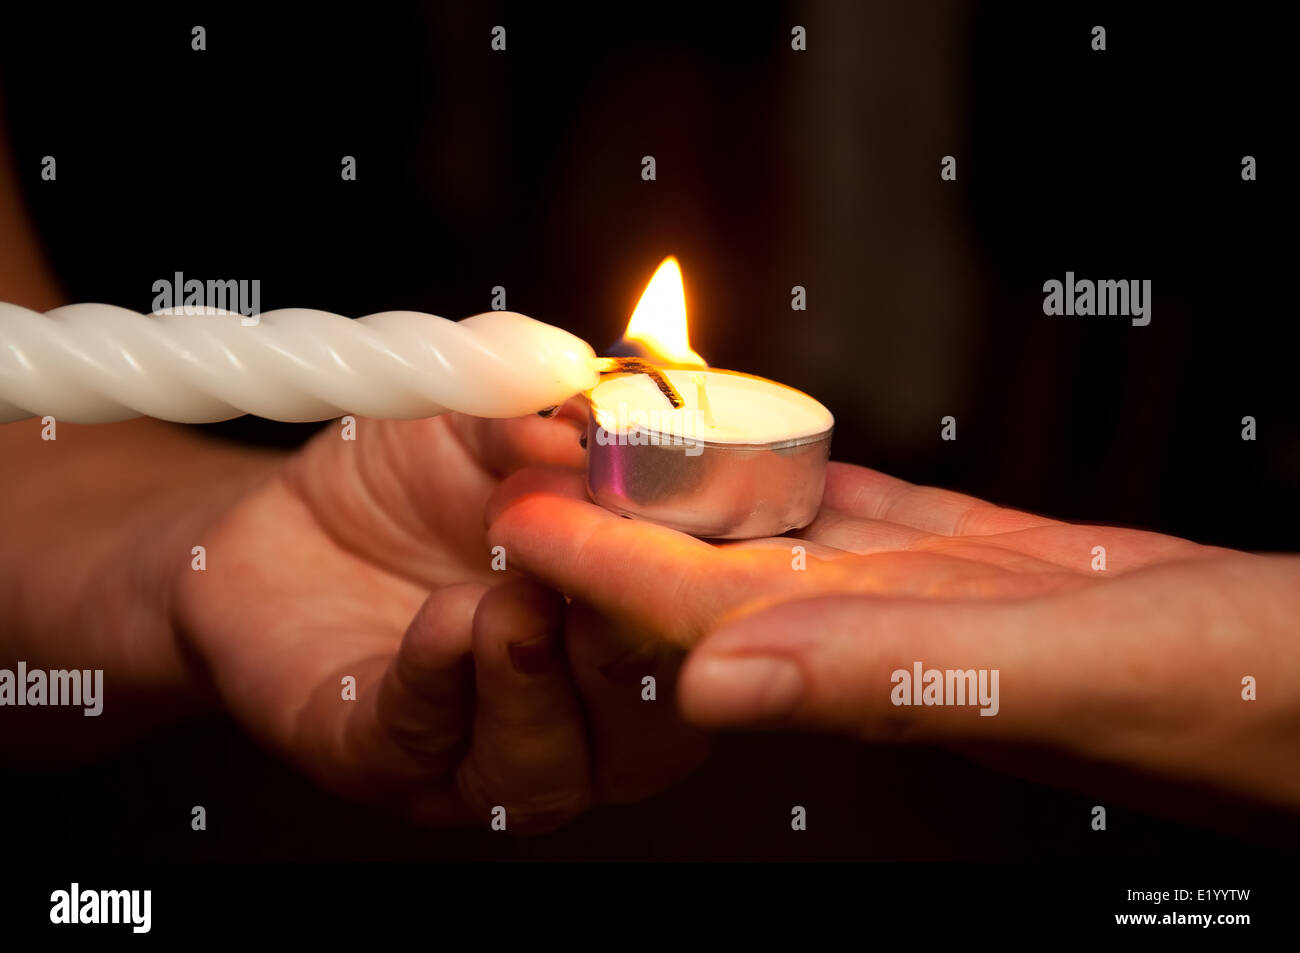 Hands lit candles Stock Photo